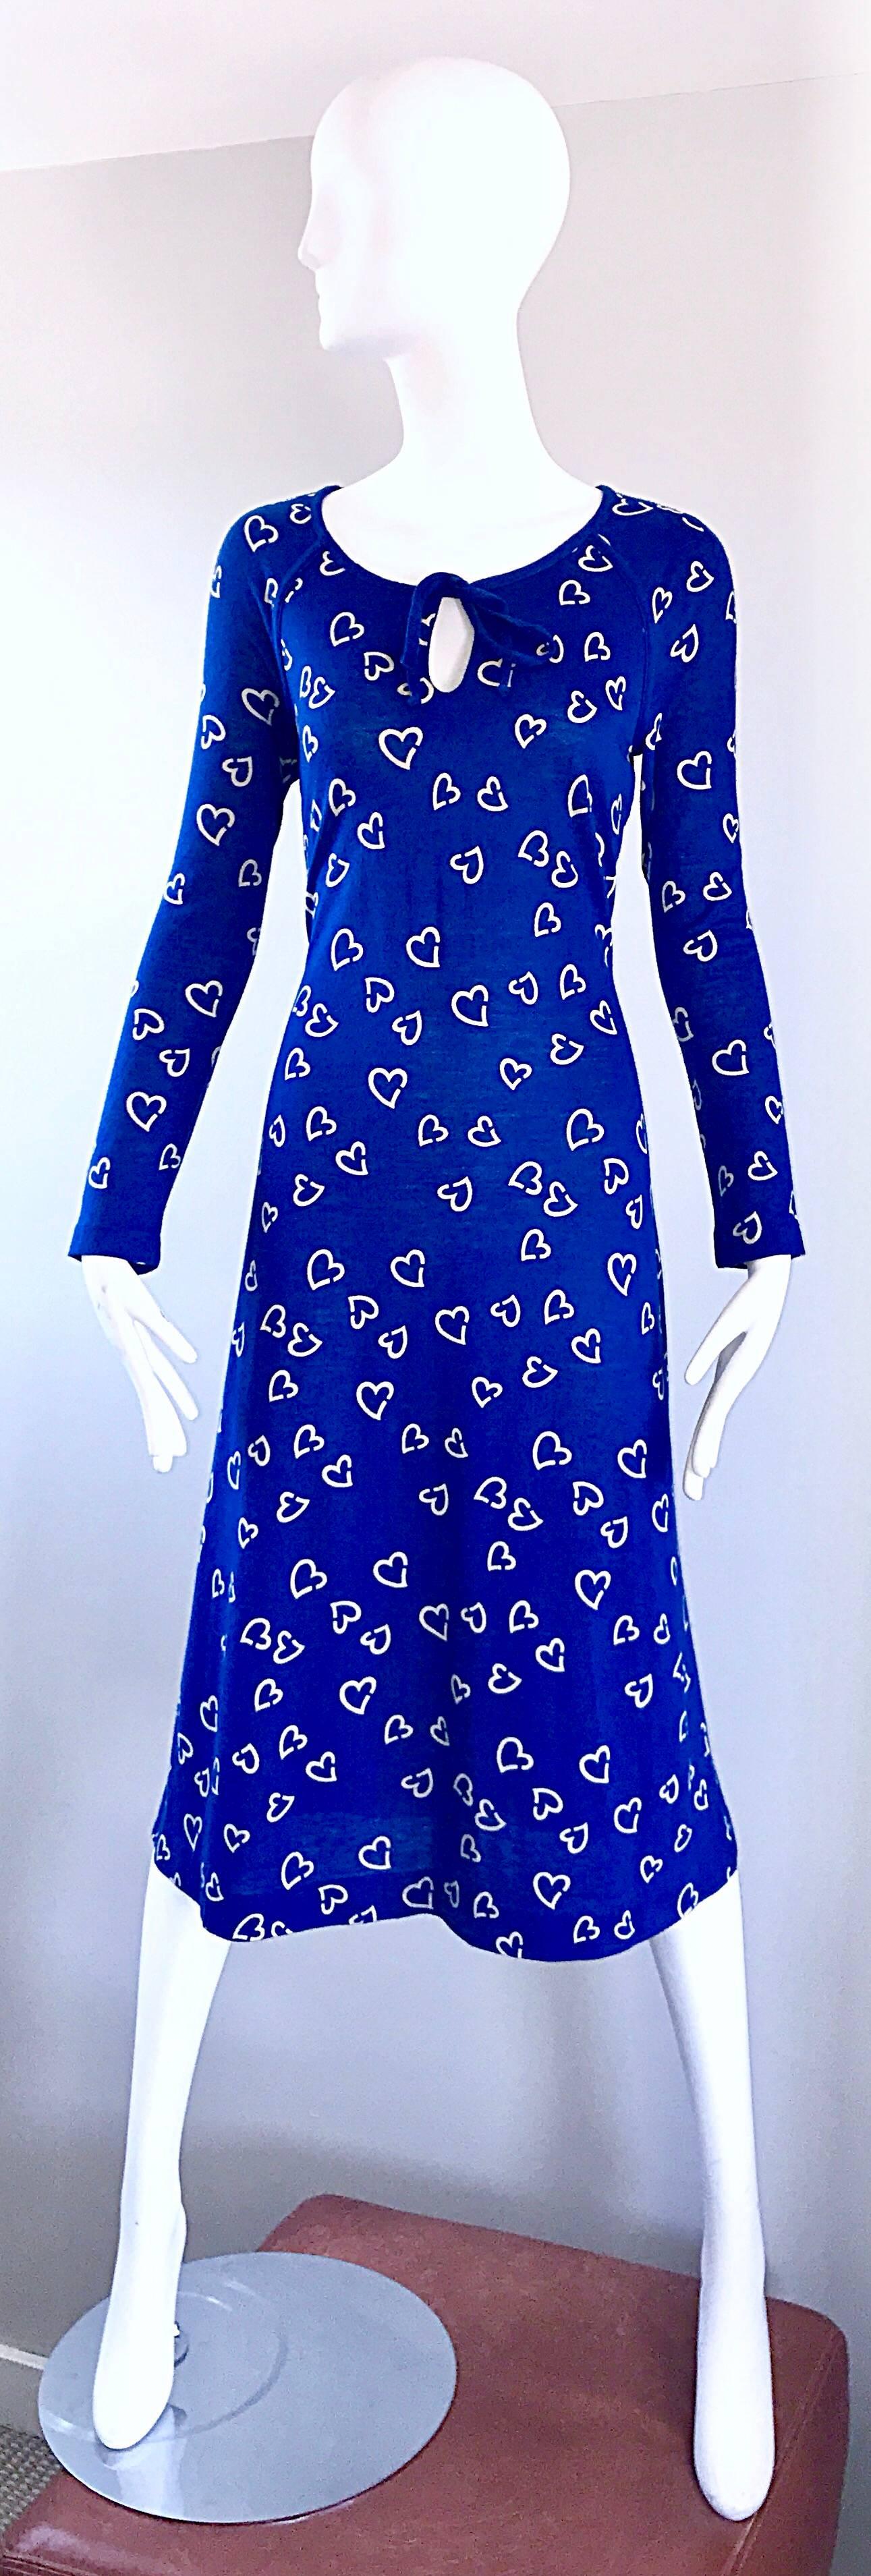 Rare and super chic 1970s DIANE VON FURSTENBERG royal blue and white heart printed long sleeve dress! Rare early 1970s gem from when DVF was just building her fashion empire. Sleek tailored bodice with long sleeves and a full skirt. Keyhole above